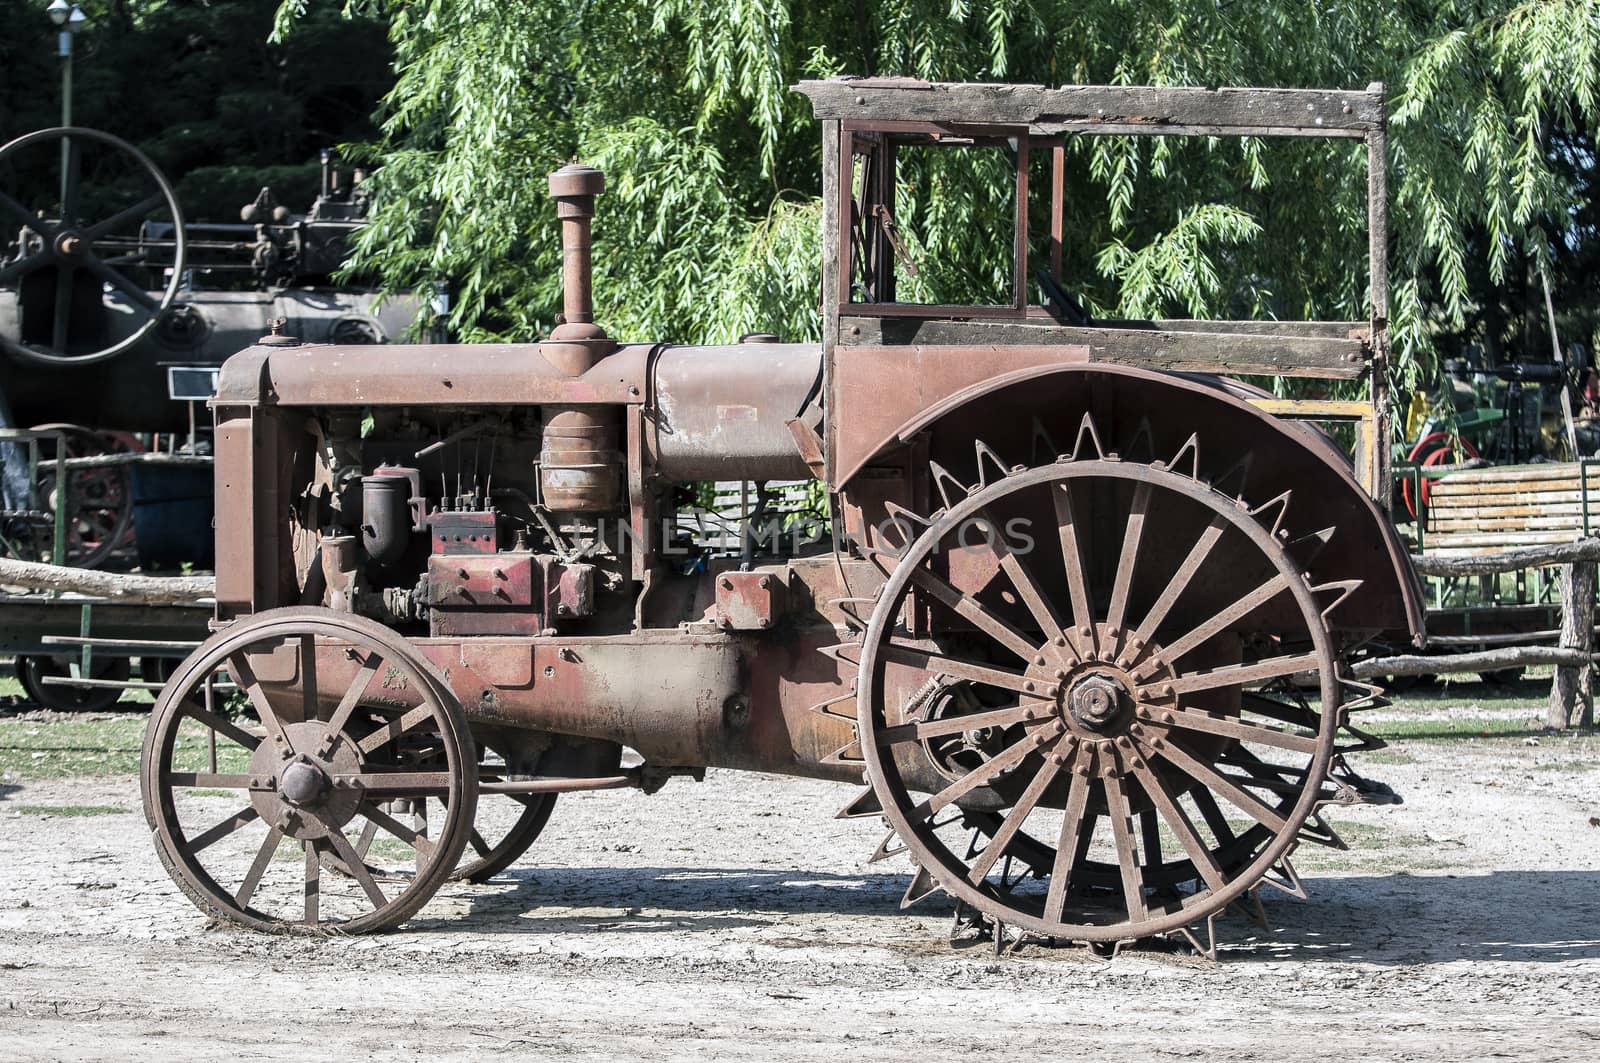 Old rusted tractor. by FER737NG